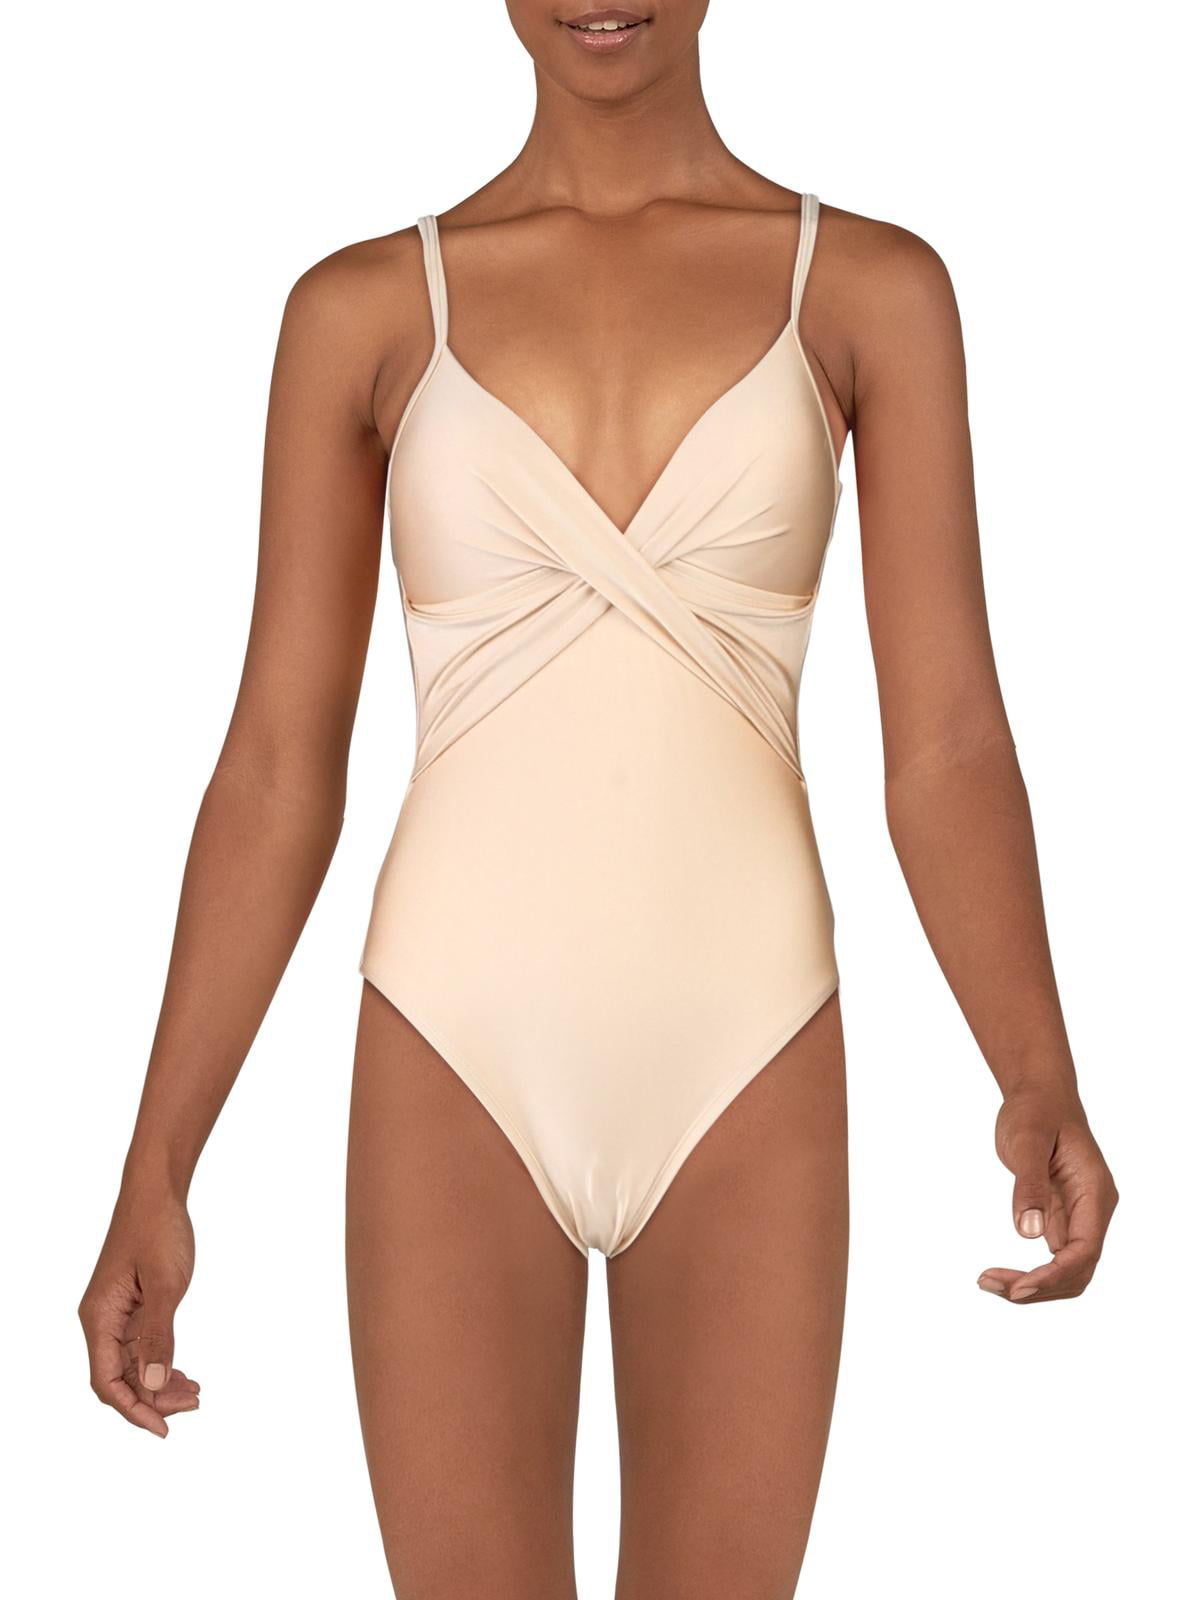 Kenneth Cole New York Womens High Neck Bandeau One Piece Swimsuit